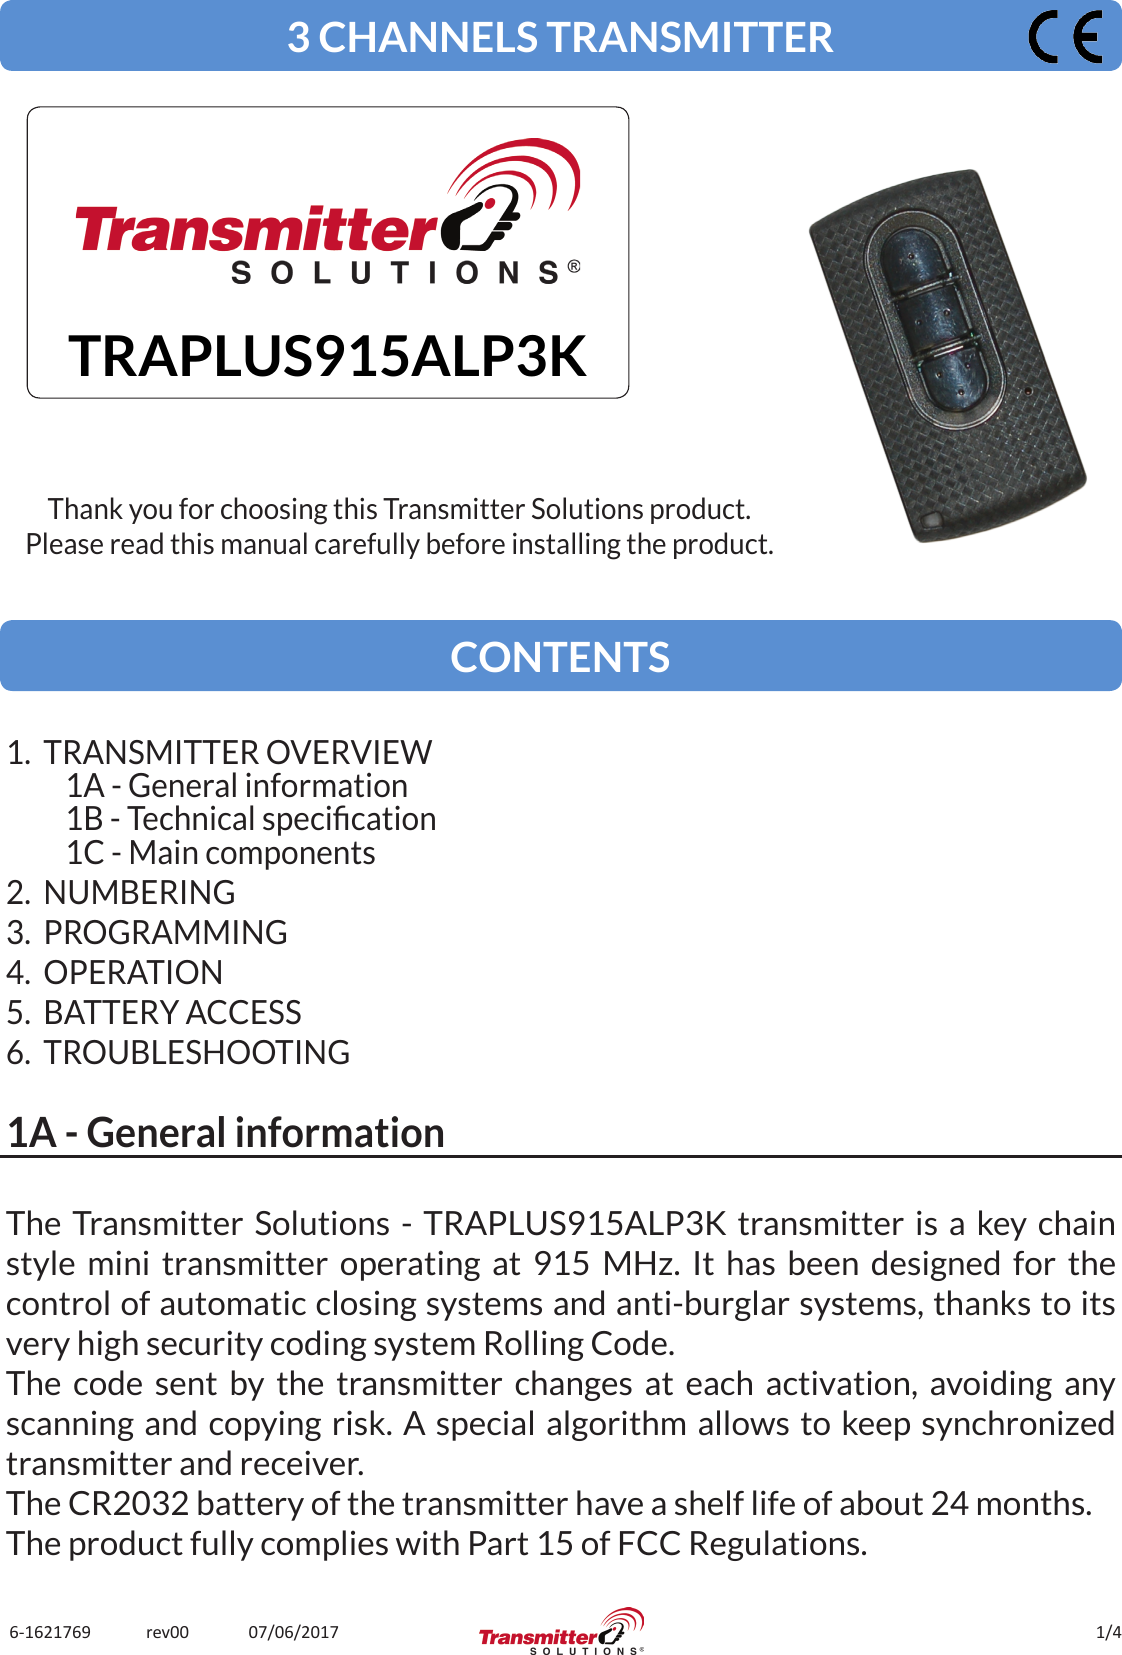 1/46-1621769             rev00              07/06/2017The Transmitter Solutions - TRAPLUS915ALP3K transmitter is a key chain style mini transmitter operating at 915 MHz. It has been designed for the control of automatic closing systems and anti-burglar systems, thanks to its very high security coding system Rolling Code.The code sent by the transmitter changes at each activation, avoiding any scanning and copying risk. A special algorithm allows to keep synchronized transmitter and receiver.The CR2032 battery of the transmitter have a shelf life of about 24 months.The product fully complies with Part 15 of FCC Regulations.3 CHANNELS TRANSMITTERTRAPLUS915ALP3KThank you for choosing this Transmitter Solutions product.Please read this manual carefully before installing the product.CONTENTS1.  TRANSMITTER OVERVIEW1A - General information1B - Technical specication1C - Main components2.  NUMBERING3.  PROGRAMMING4.  OPERATION5.  BATTERY ACCESS6.  TROUBLESHOOTING1A - General information